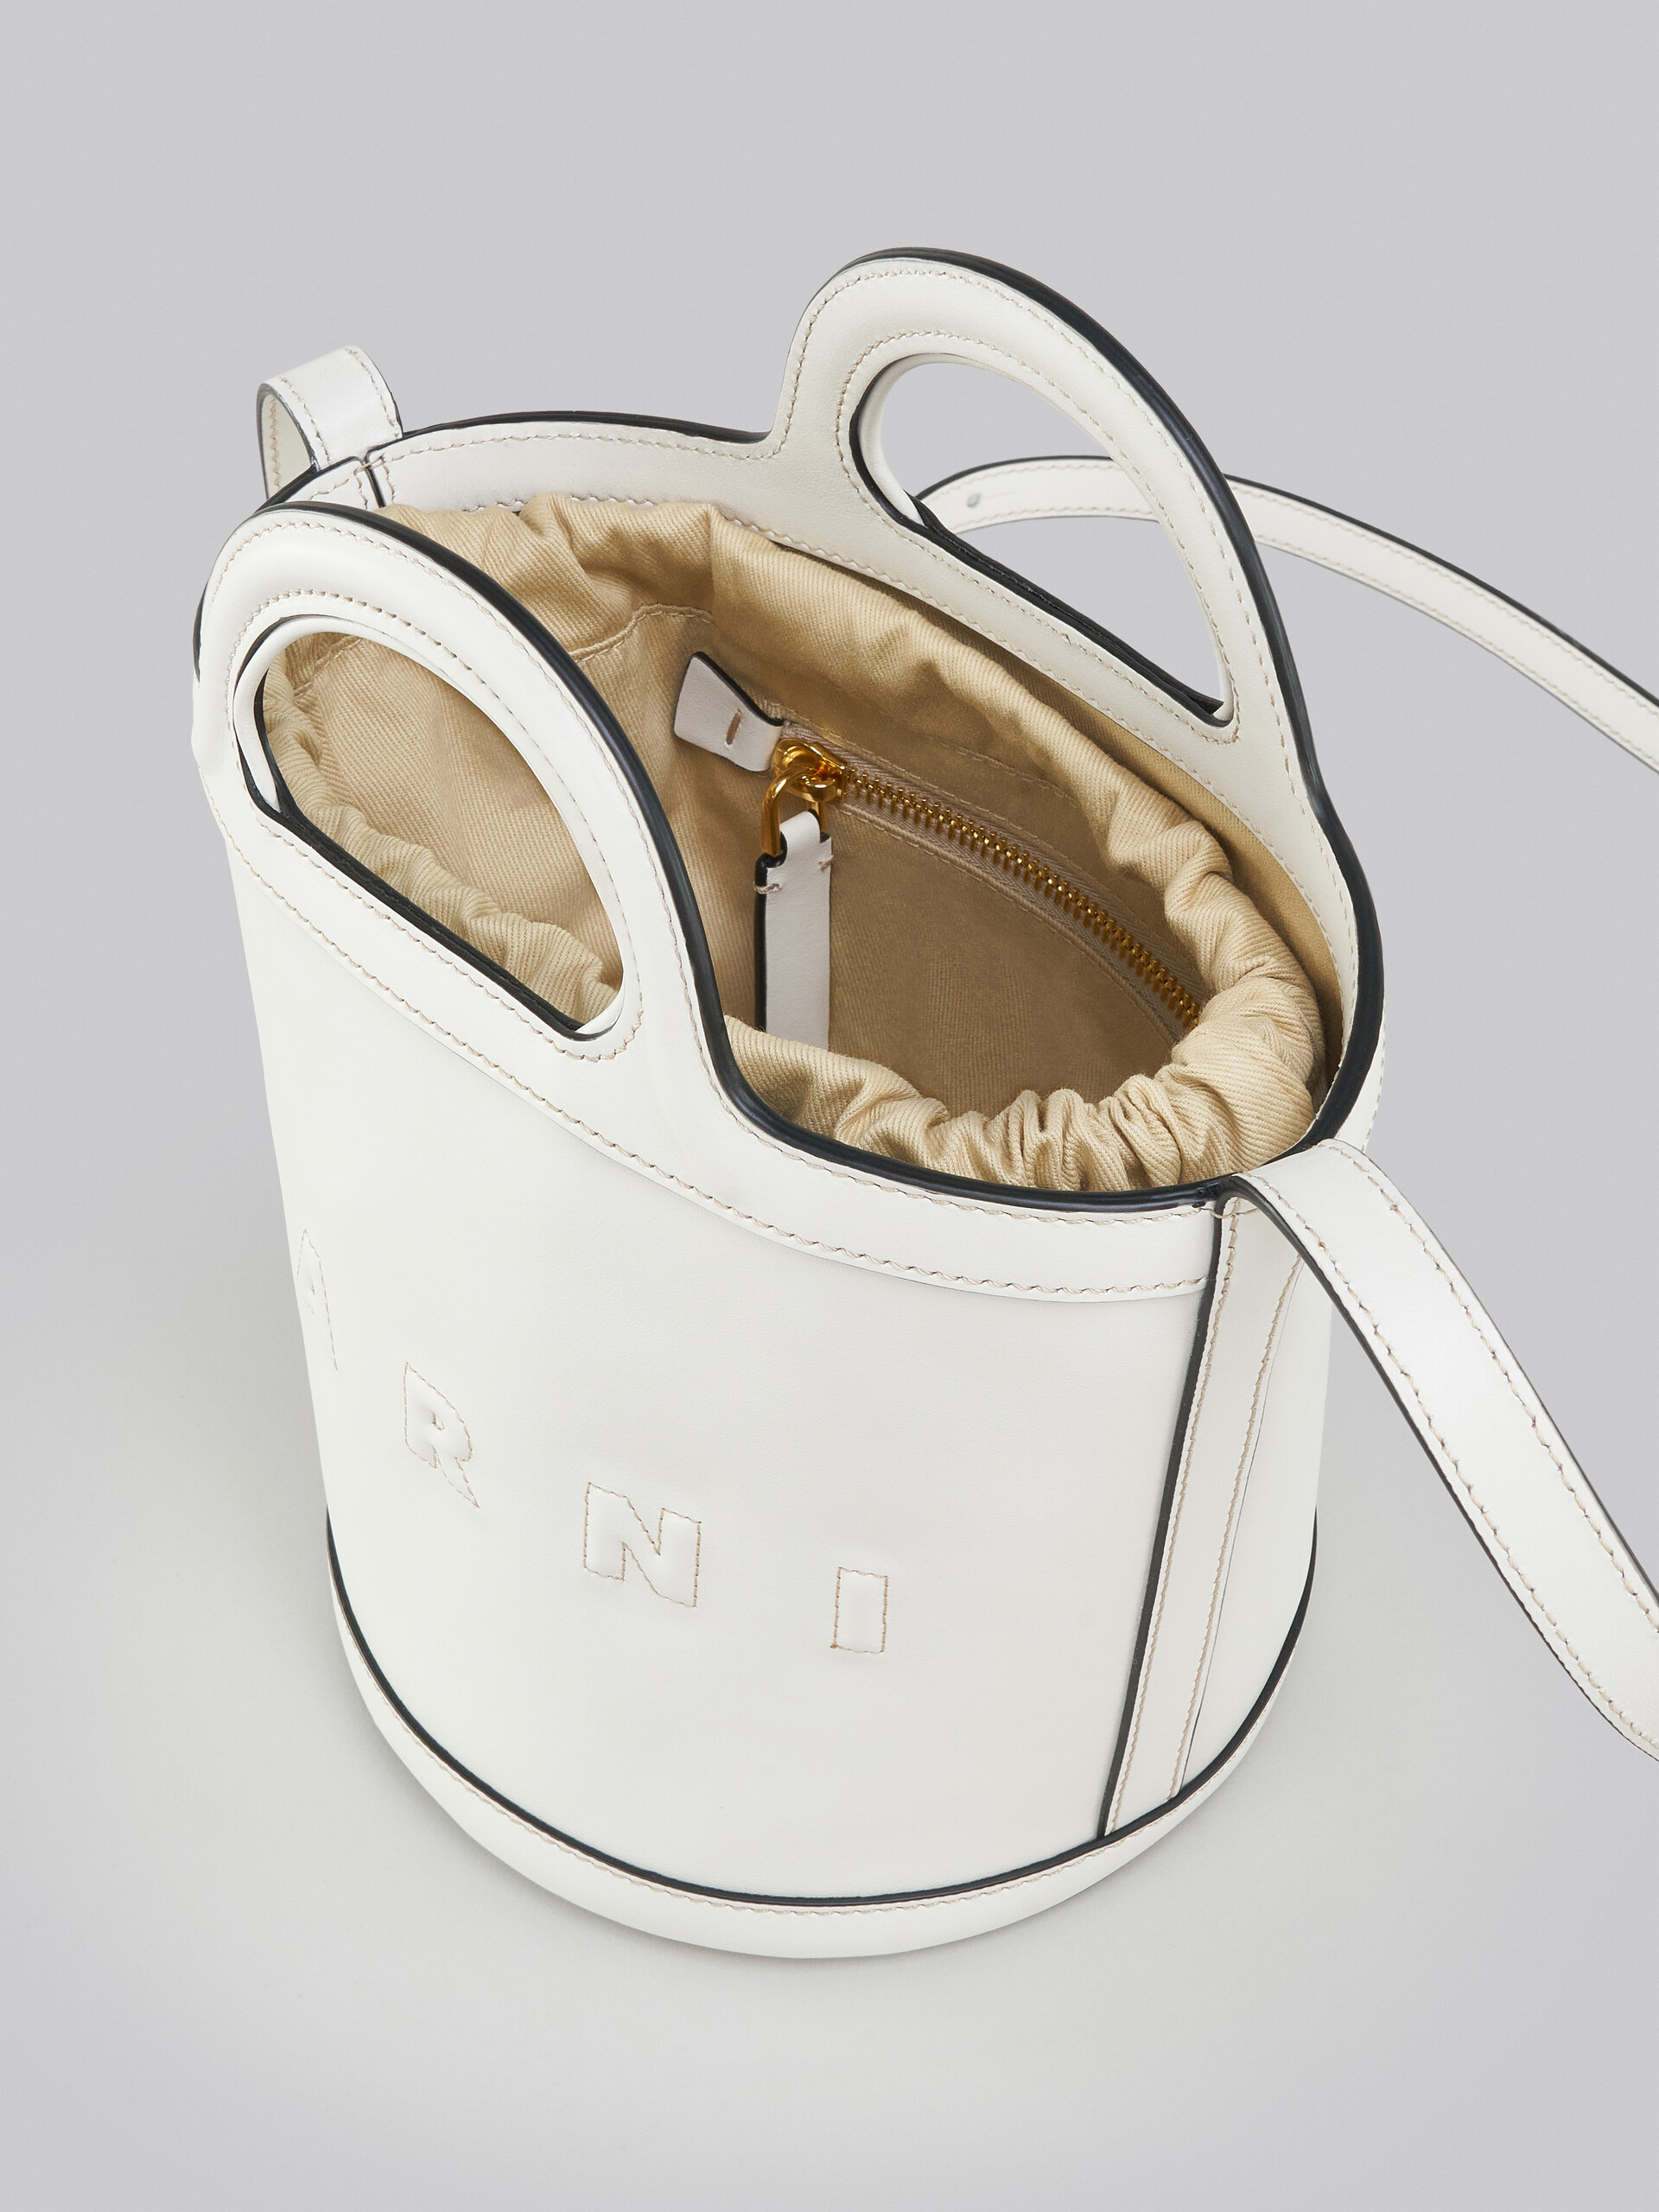 Tropicalia Small Bucket Bag in white leather